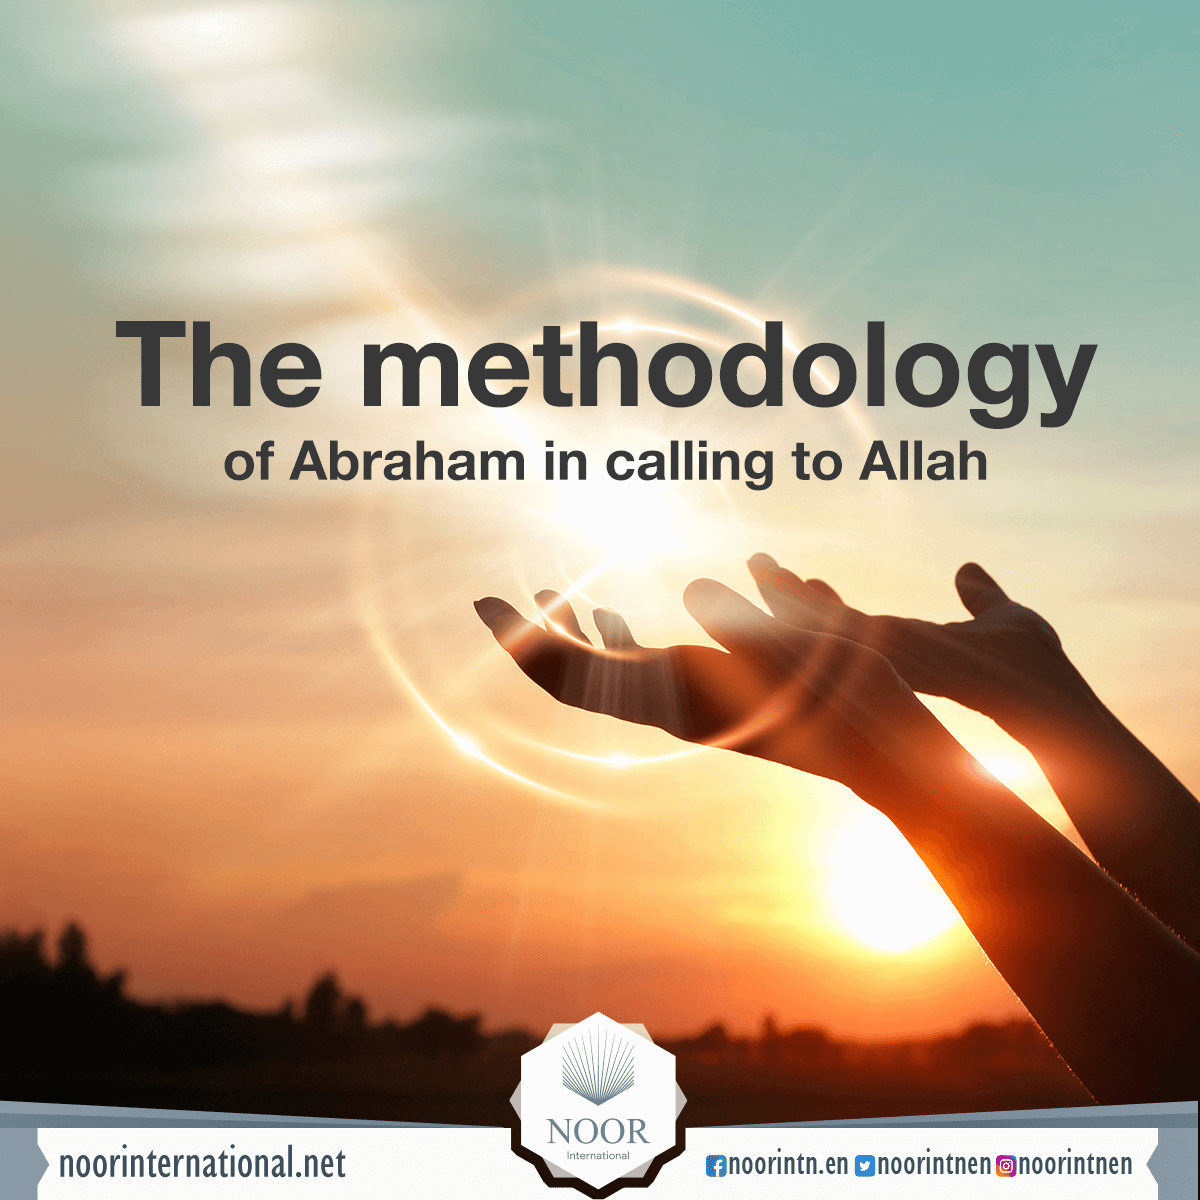 The methodology of Abraham in calling to Allah